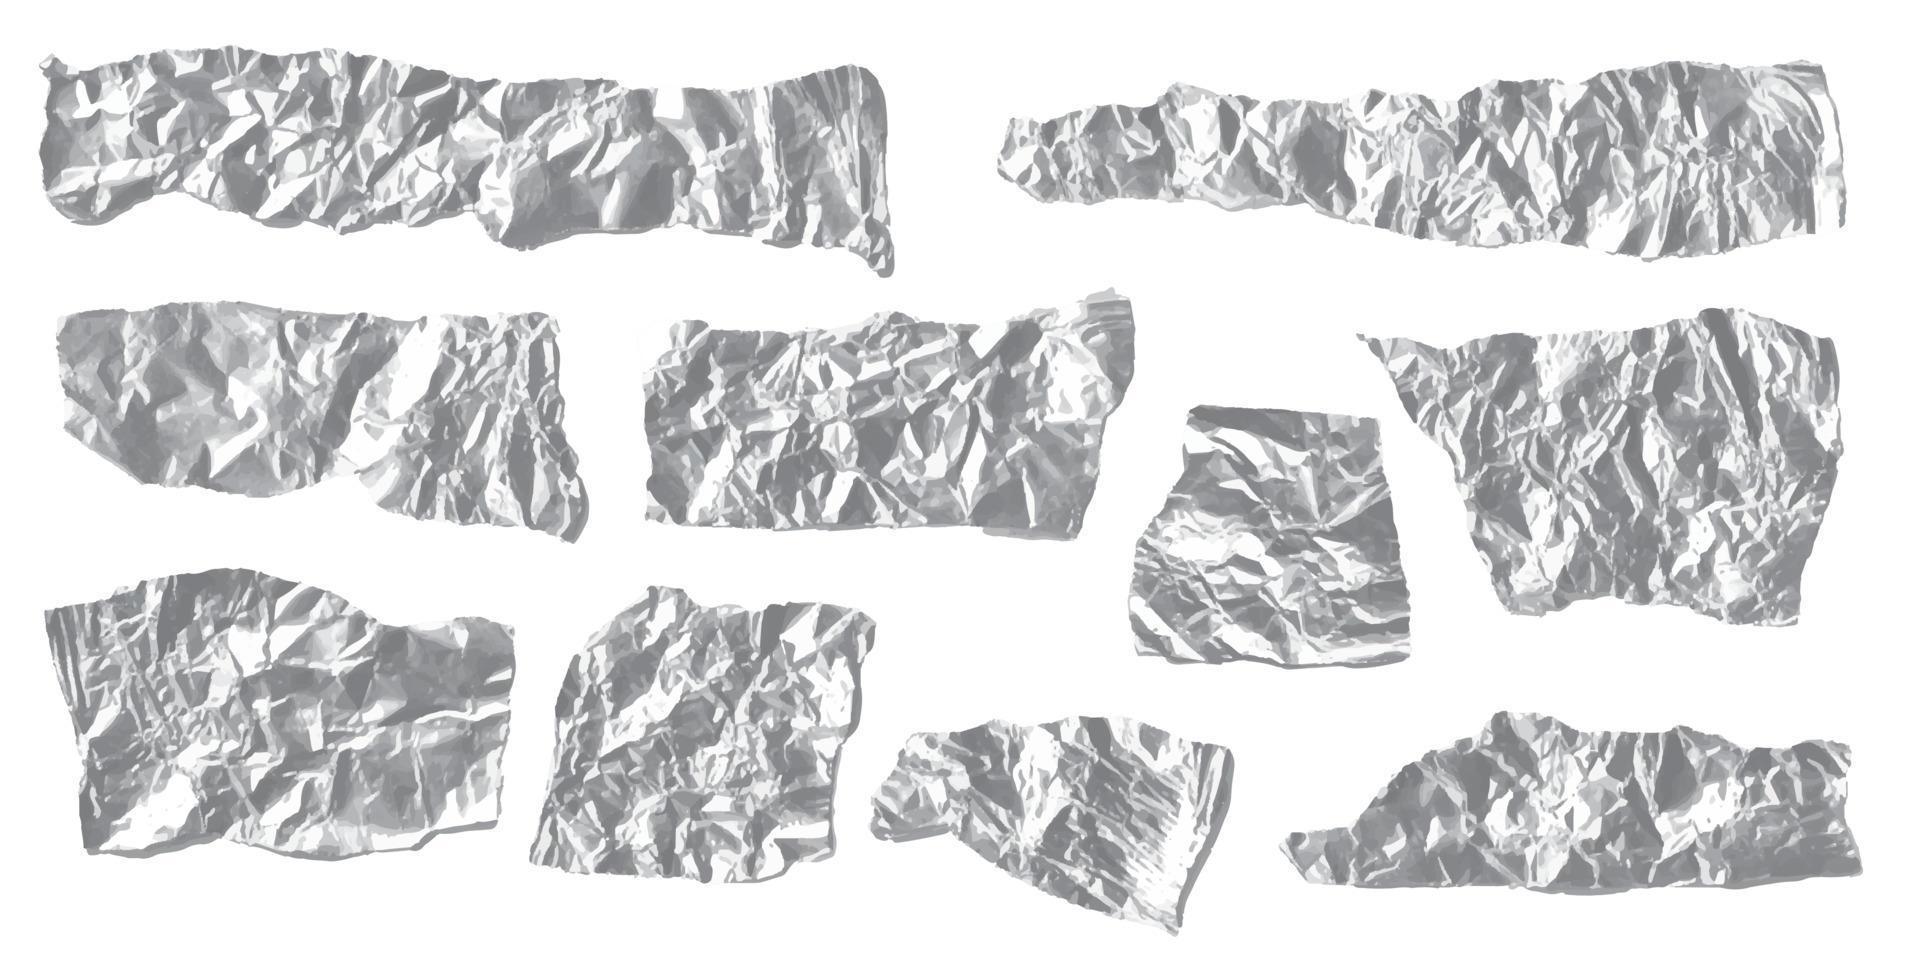 Vector illustration of silver rumpled foil texture. Graphics background for design.